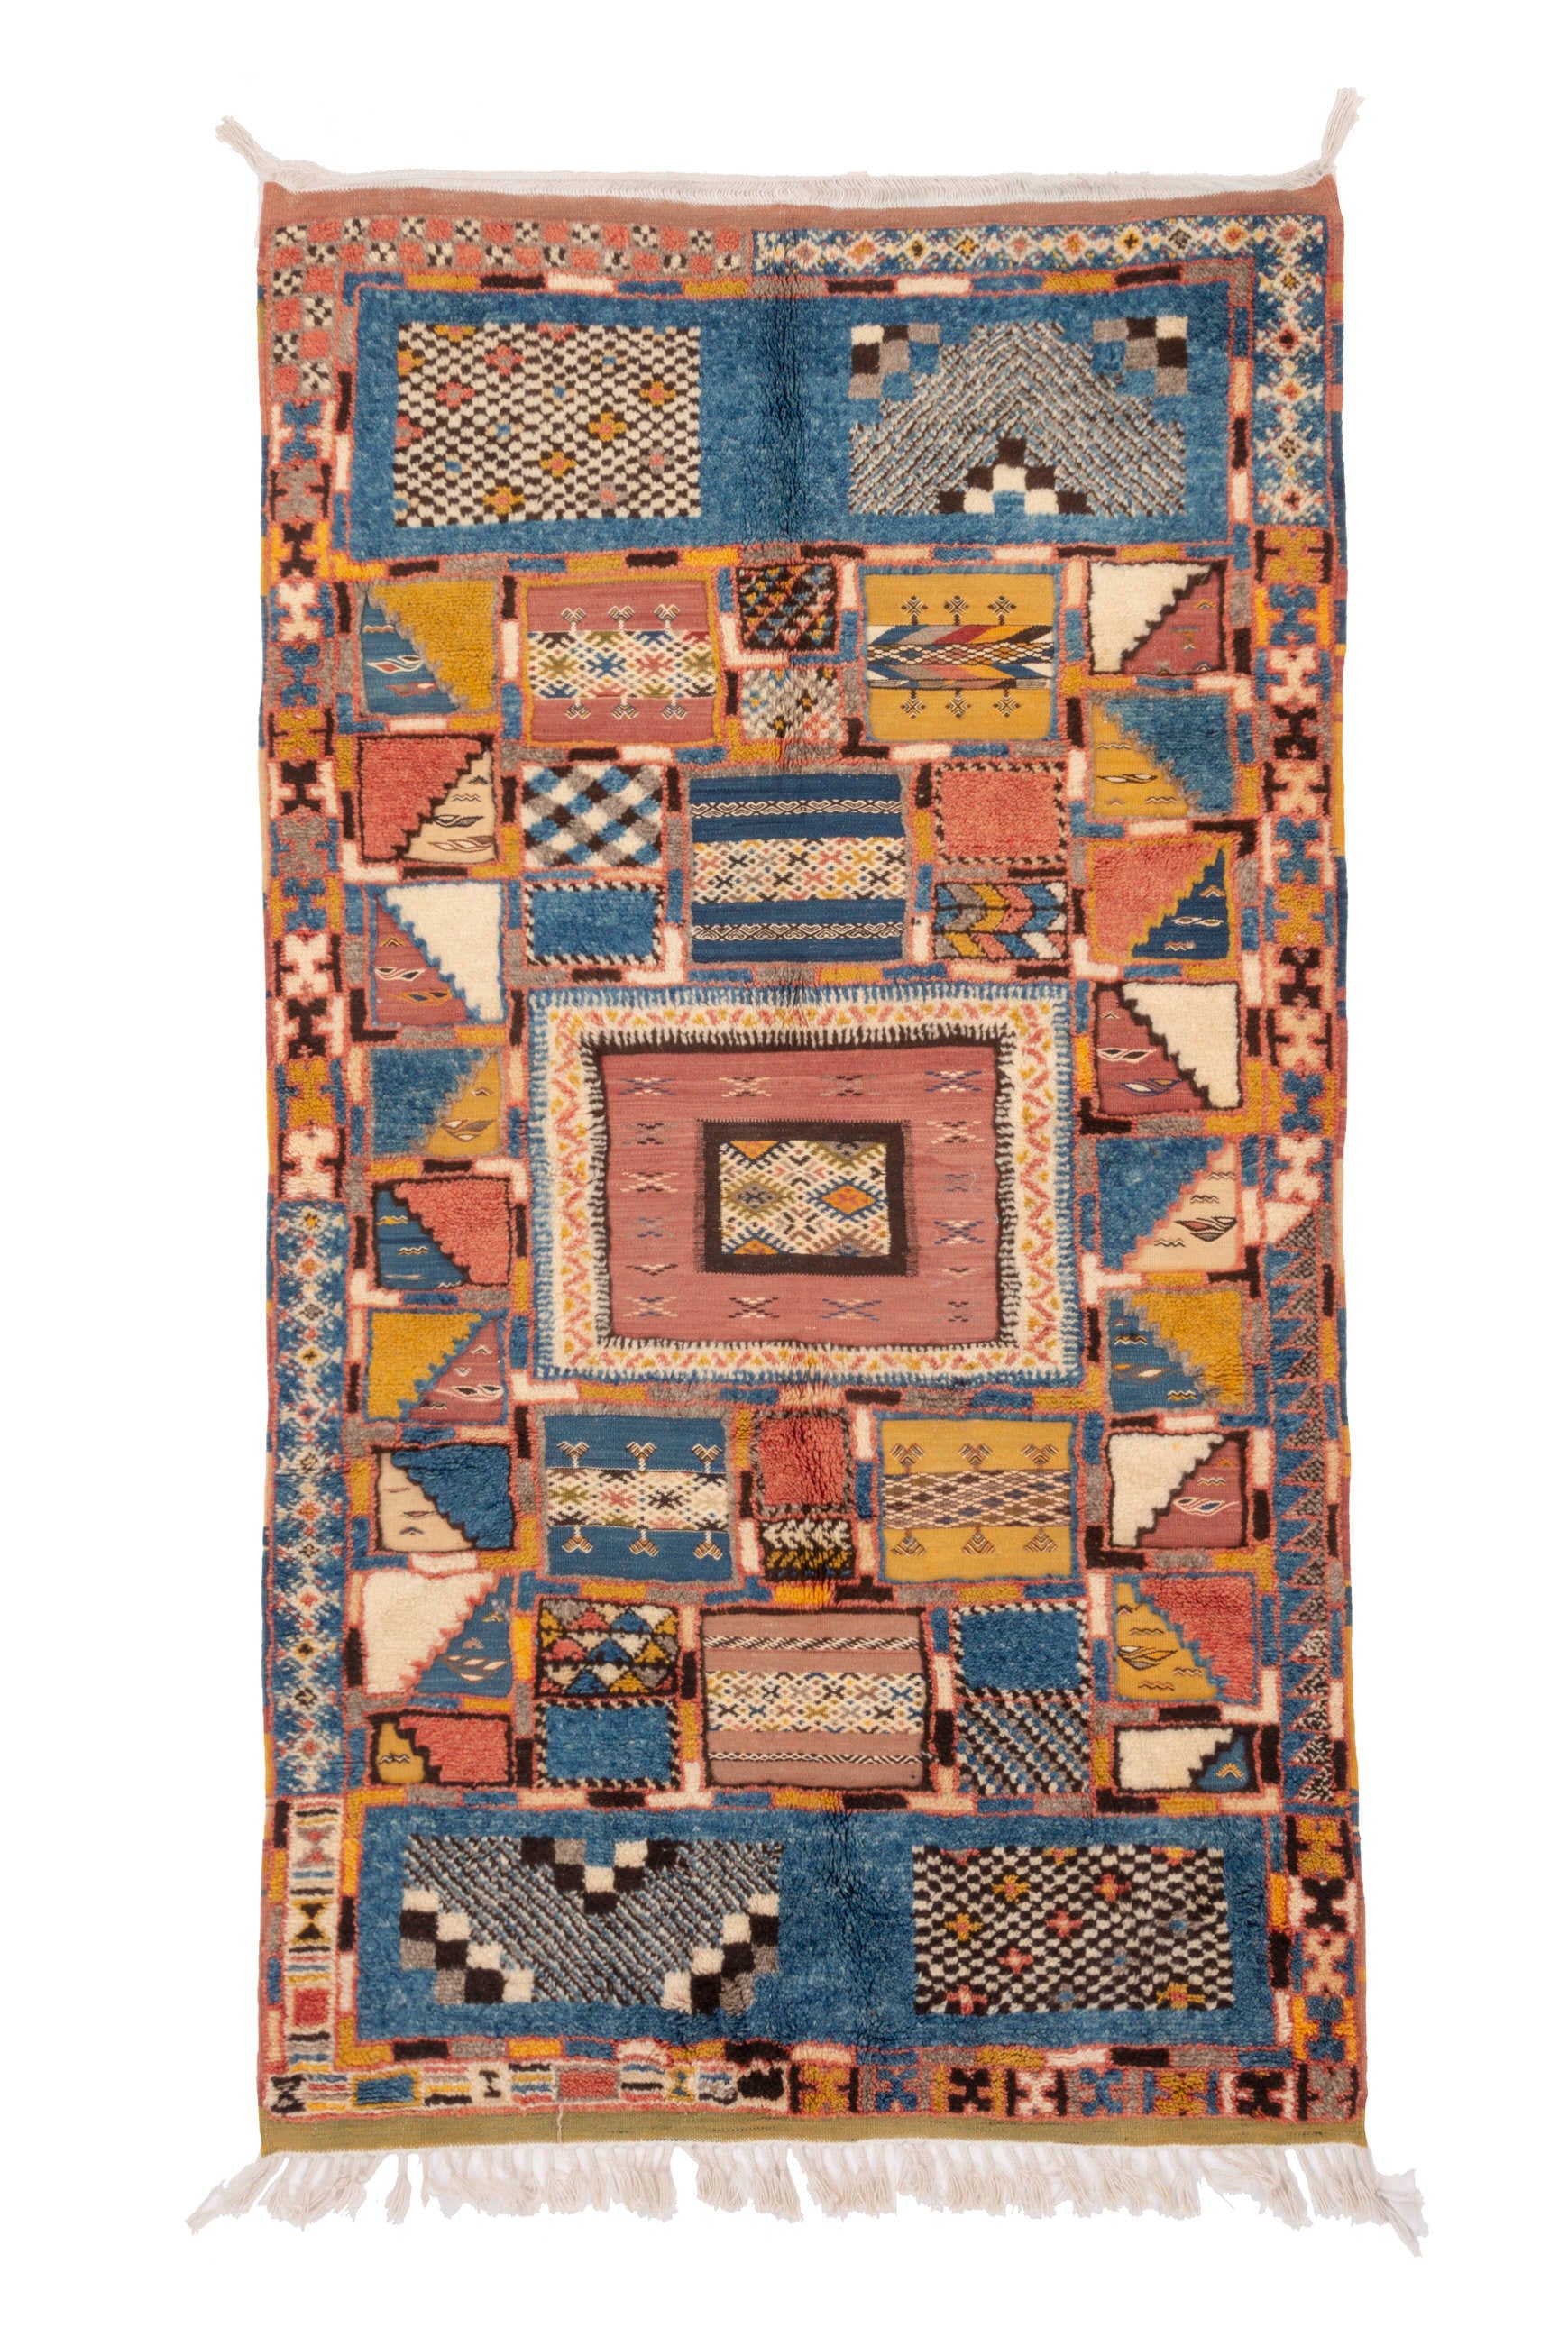 Indulge in the timeless allure of our Sunset Serenity Glawi Rug. With a classic geometric glawi pattern adorned in a mix of vintage blue, pink, and yellow tones, this rug exudes charm and character. Elevate your space with the artistry of traditional craftsmanship and the soothing hues of a bygone era.